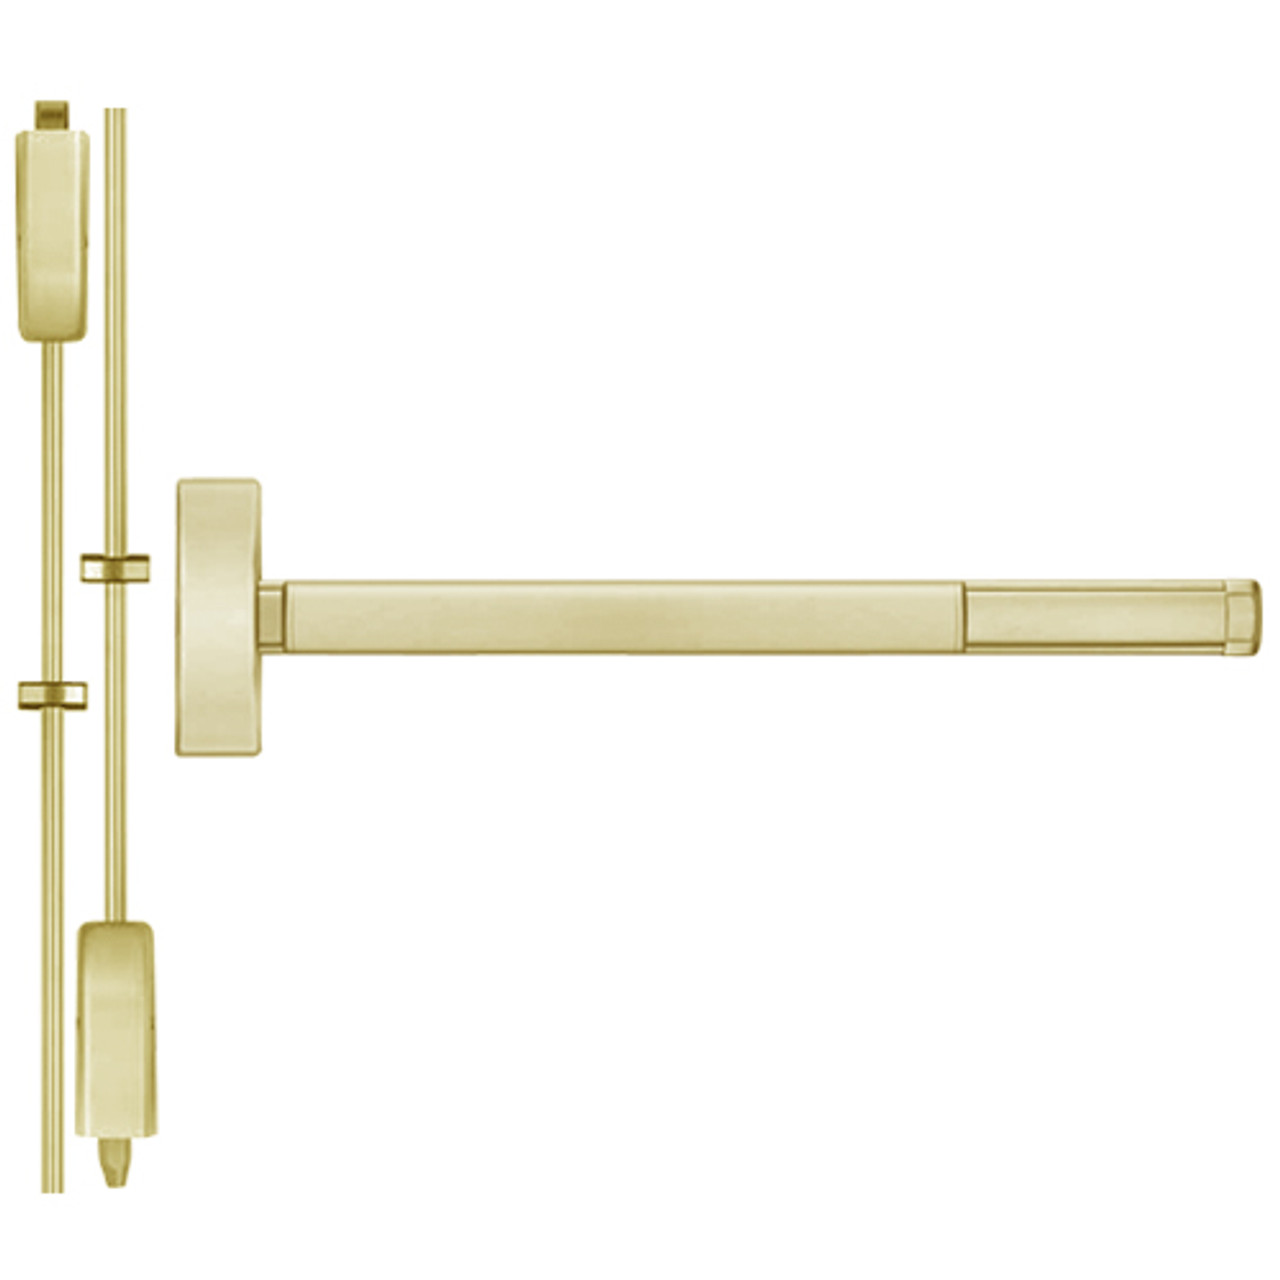 MLRFL2202-606-36 PHI 2200 Series Apex Surface Vertical Rod Device with Motorized Latch Retraction Prepped for Dummy Trim in Satin Brass Finish